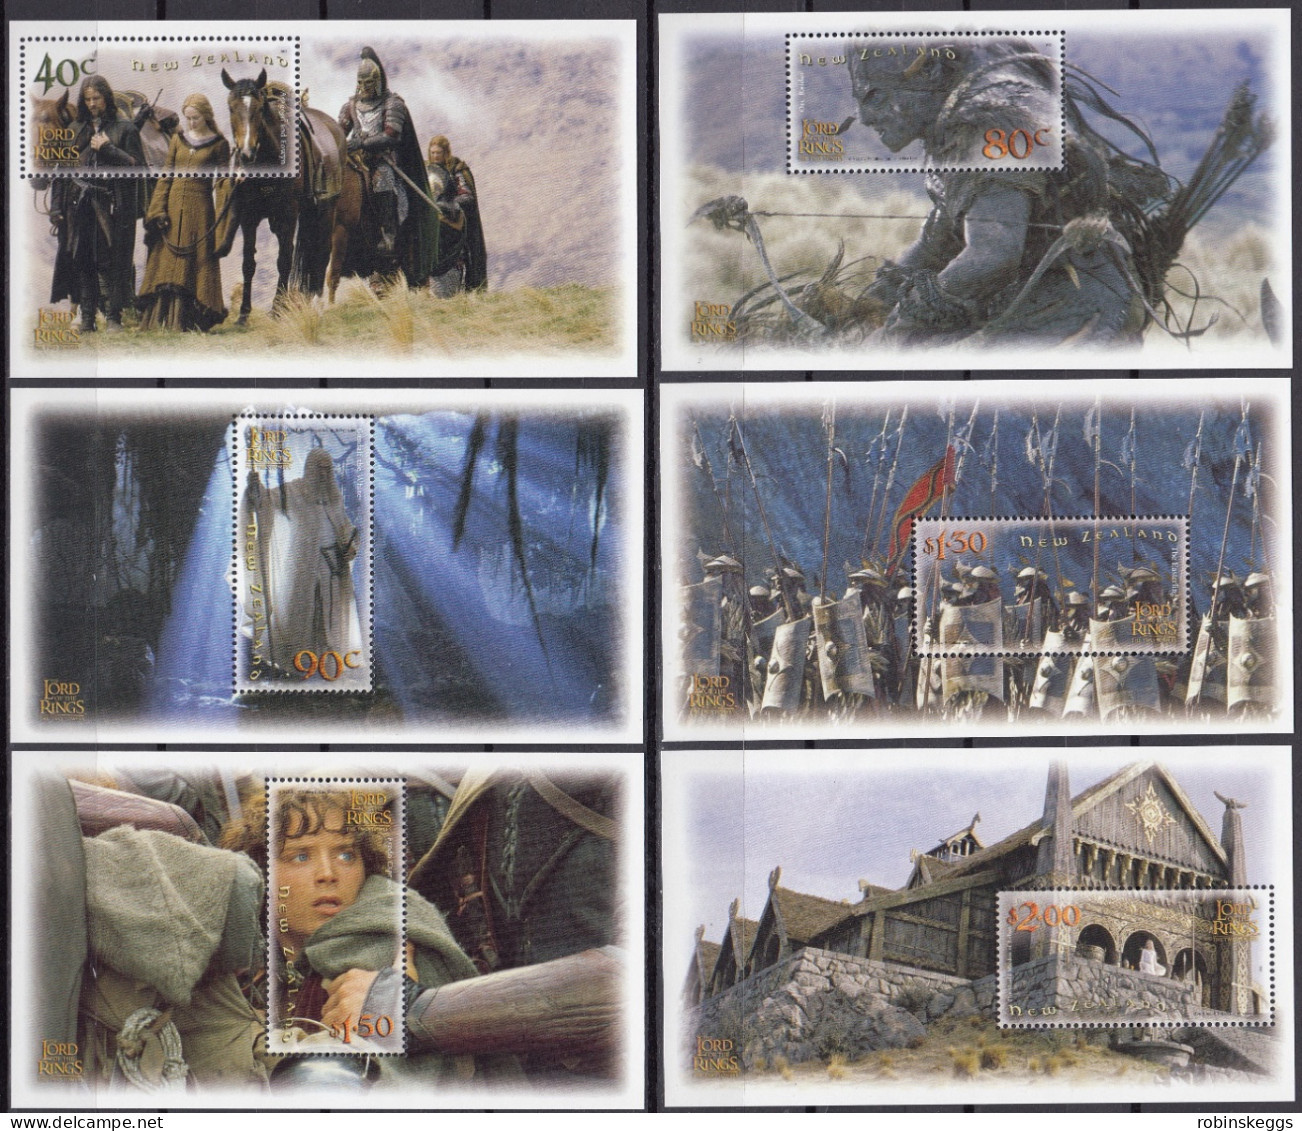 NEW ZEALAND 2002 Lord Of The Rings: The Two Towers, Set Of 6 M/S’s MNH - Vignettes De Fantaisie